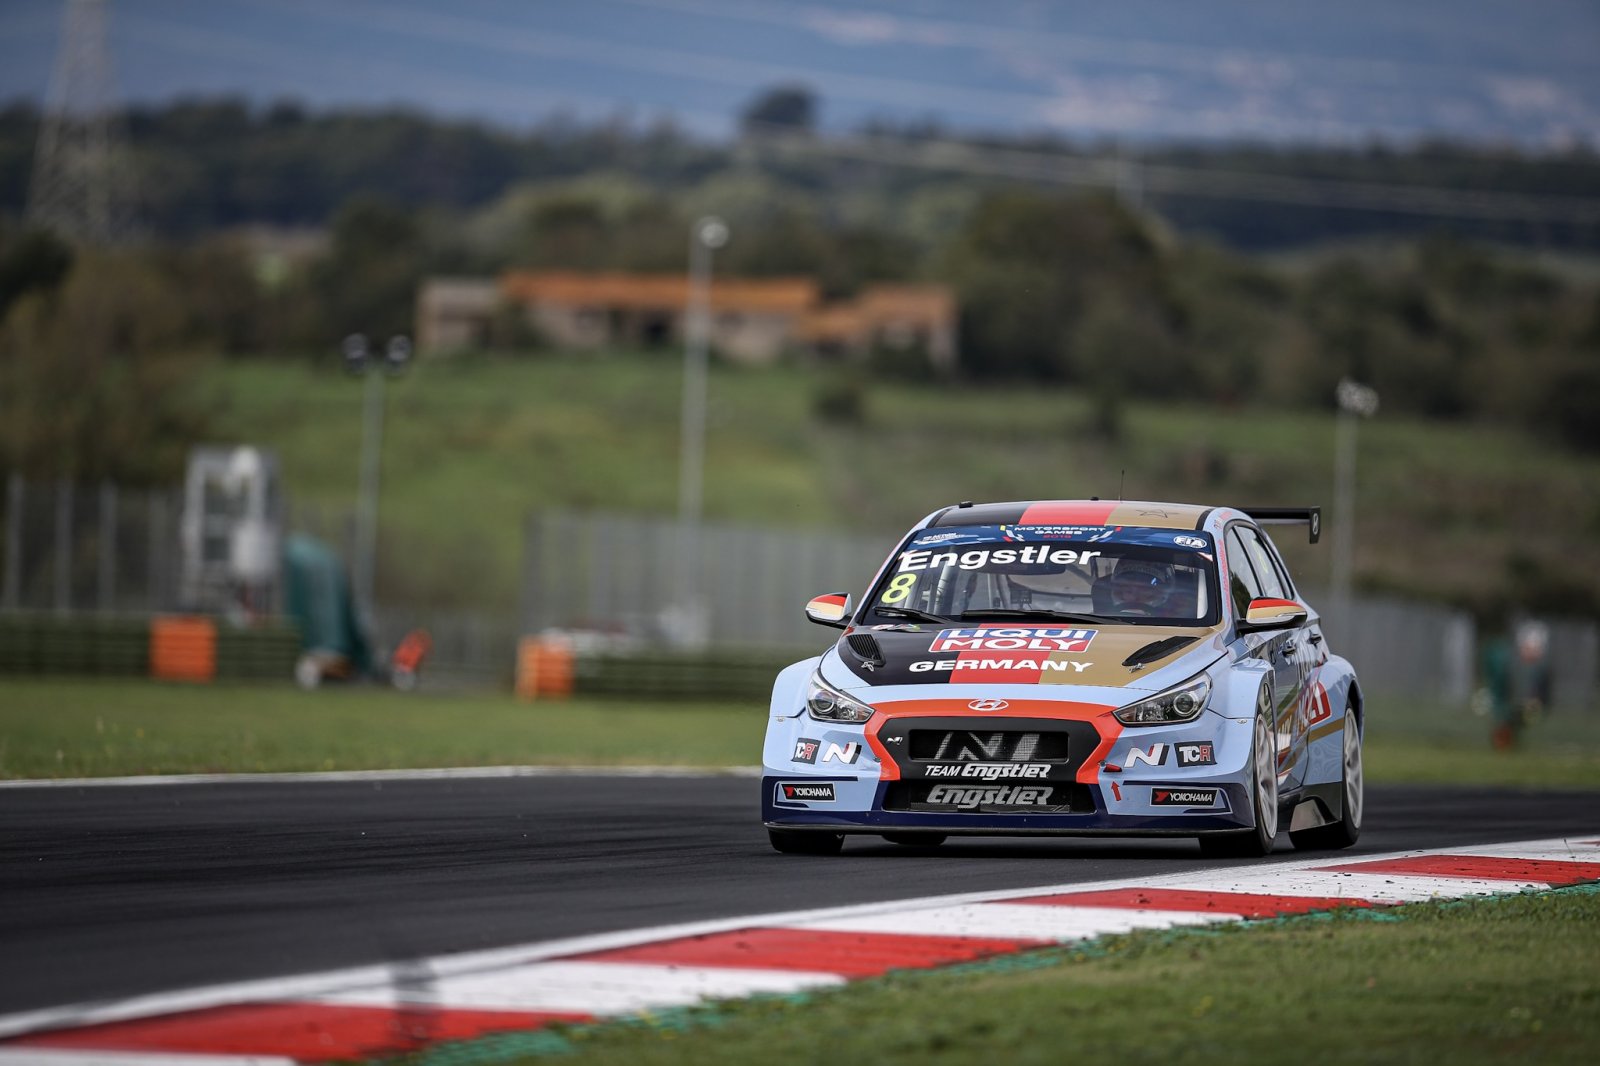 Engstler sets early pace in opening Touring Car Cup practice